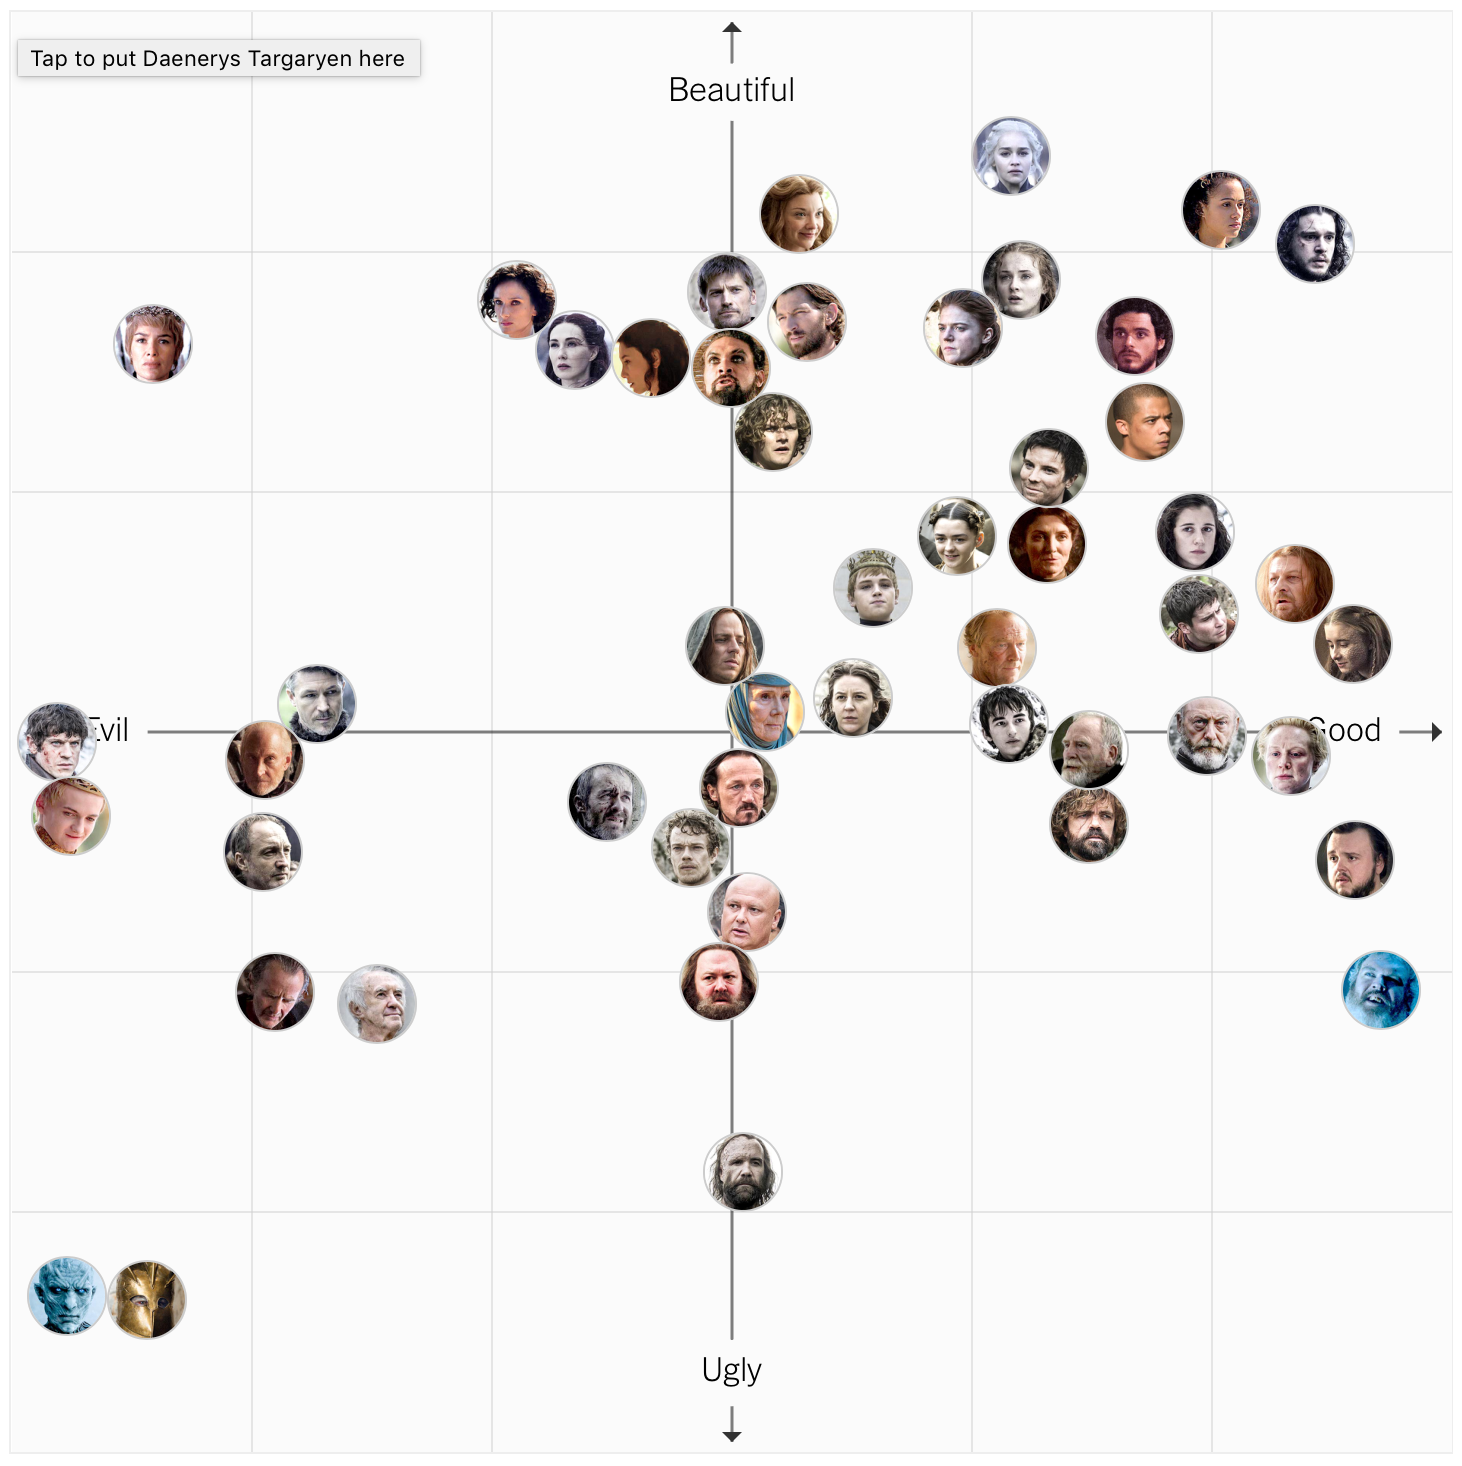 game of thrones character map season 4